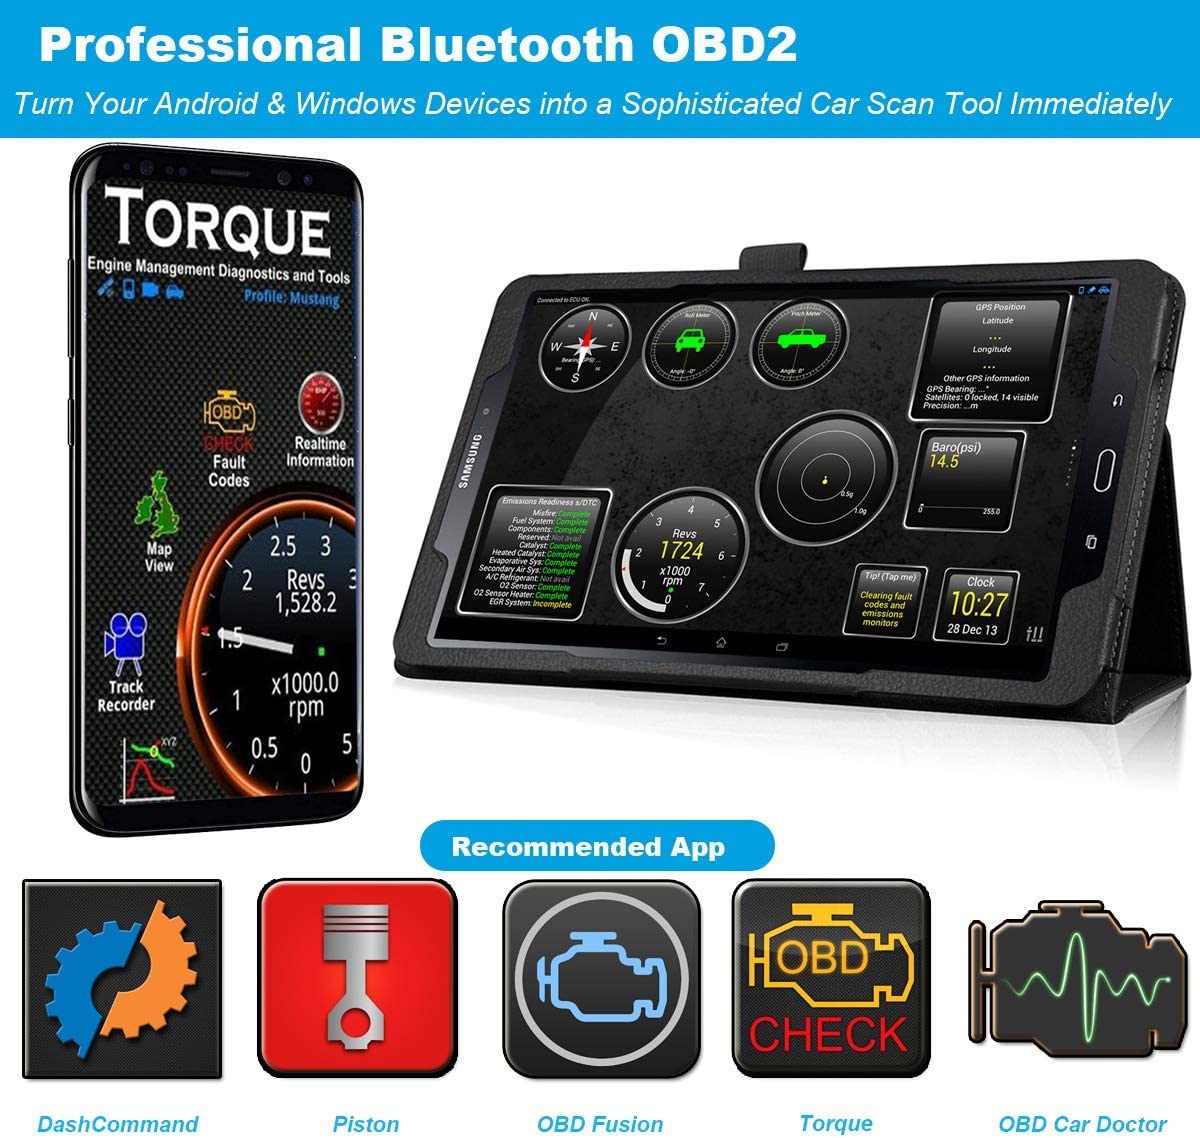 Kitbest OBD2 Scanner Bluetooth for Android, Supports Torque Pro, OBD Fusion App